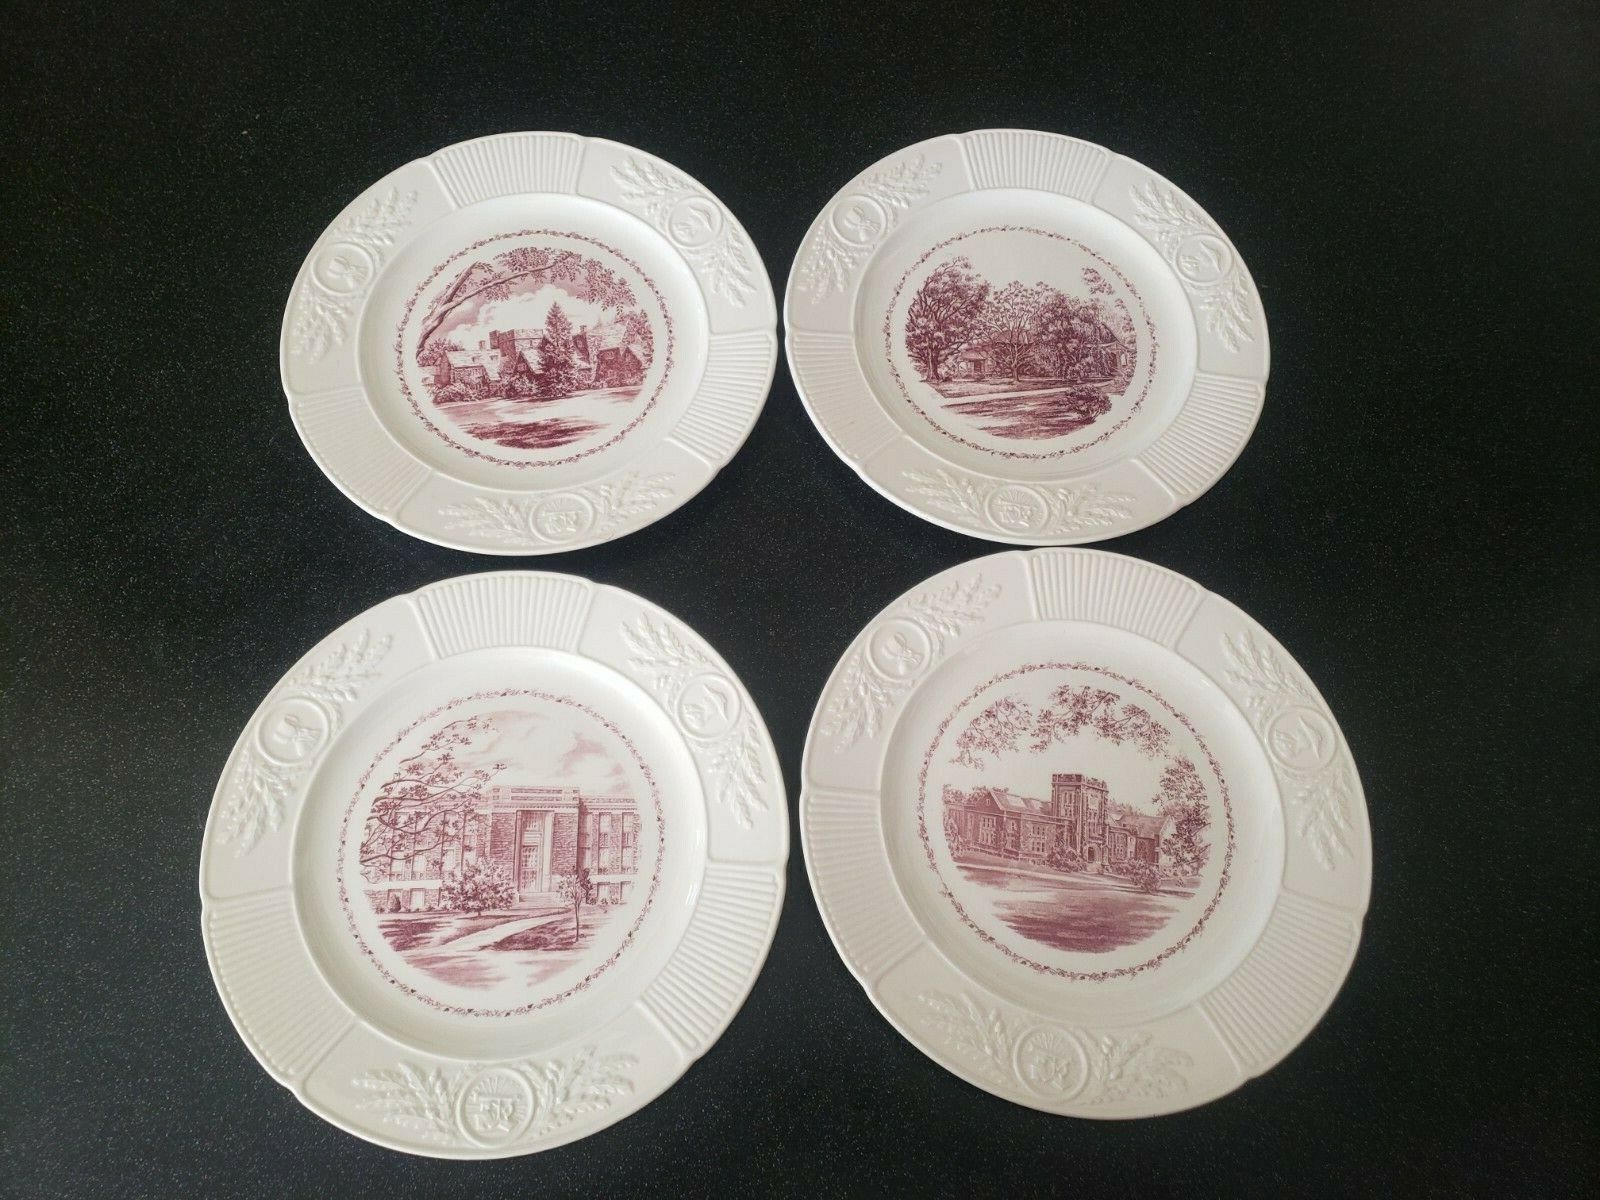 4 ANTIQUE WEDGWOOD ENGLAND SWARTHMORE COLLEGE PENNSYLVANIA PLATES  THE LIBRARY